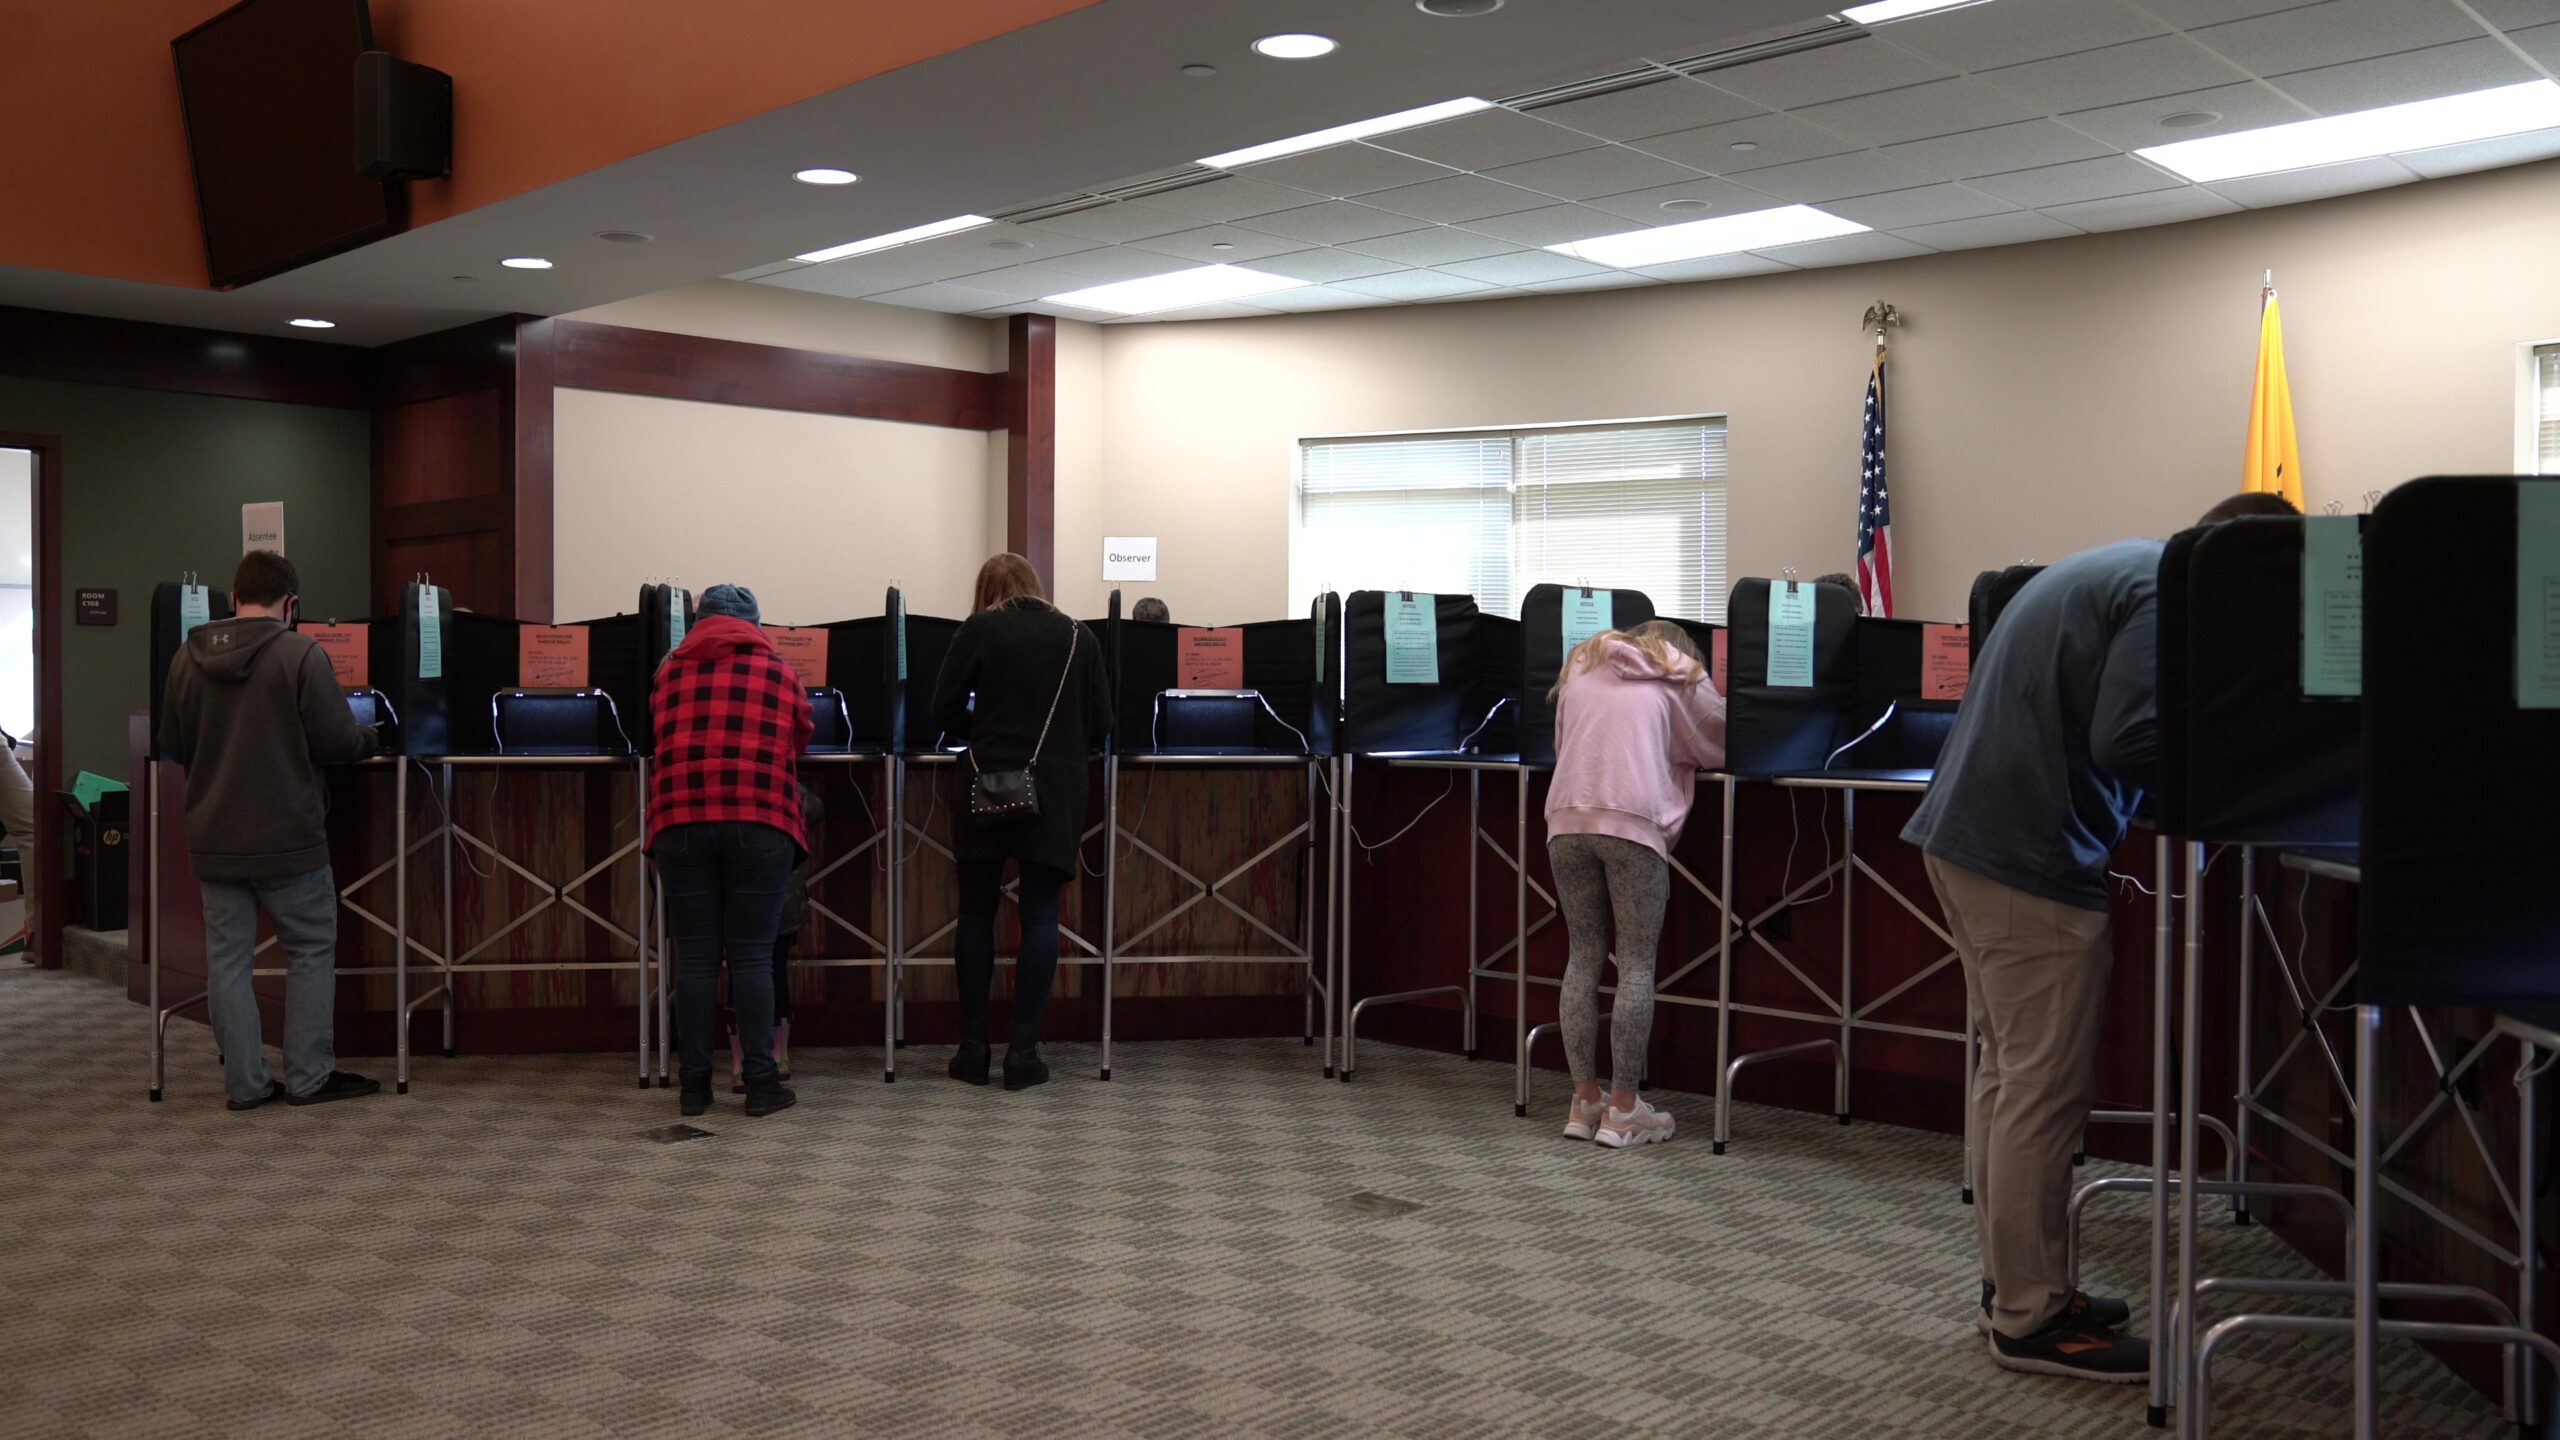 People stand and vote in booths with metal legs and vertical privacy dividers in a government building with a U.S. flag.